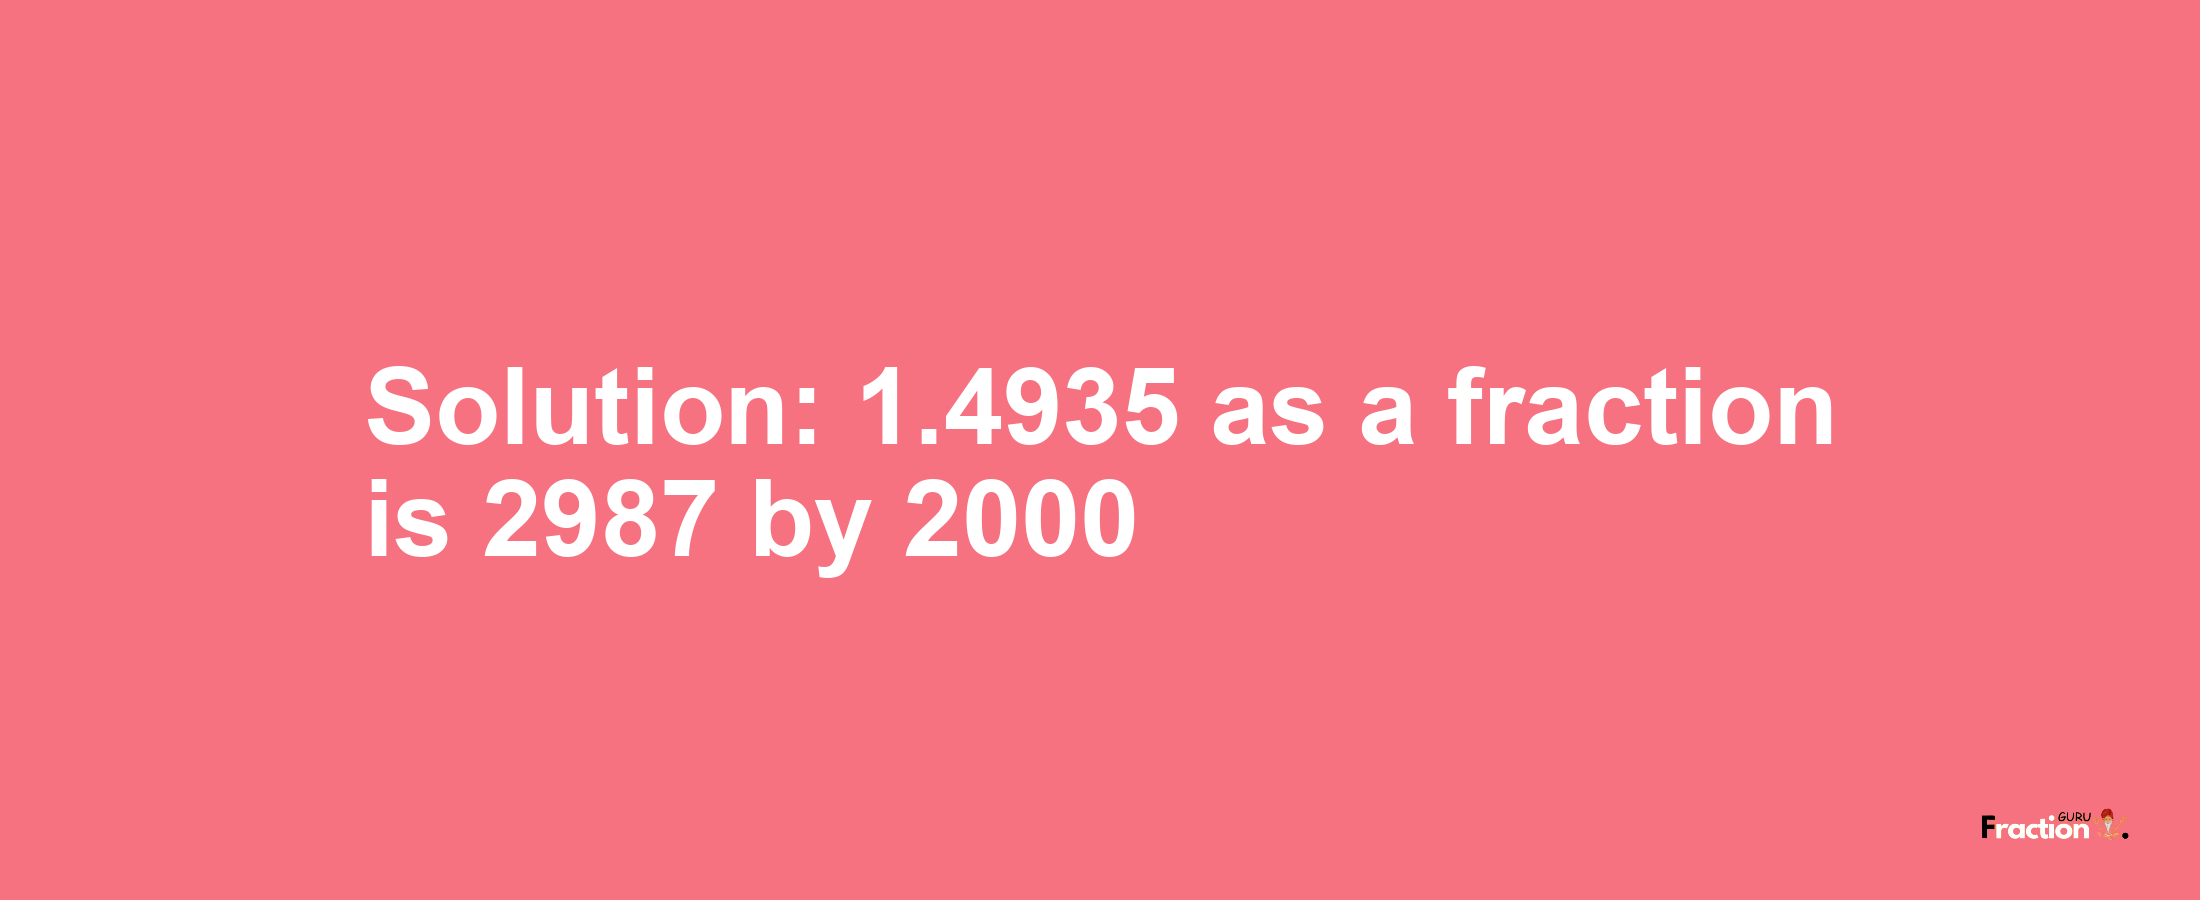 Solution:1.4935 as a fraction is 2987/2000